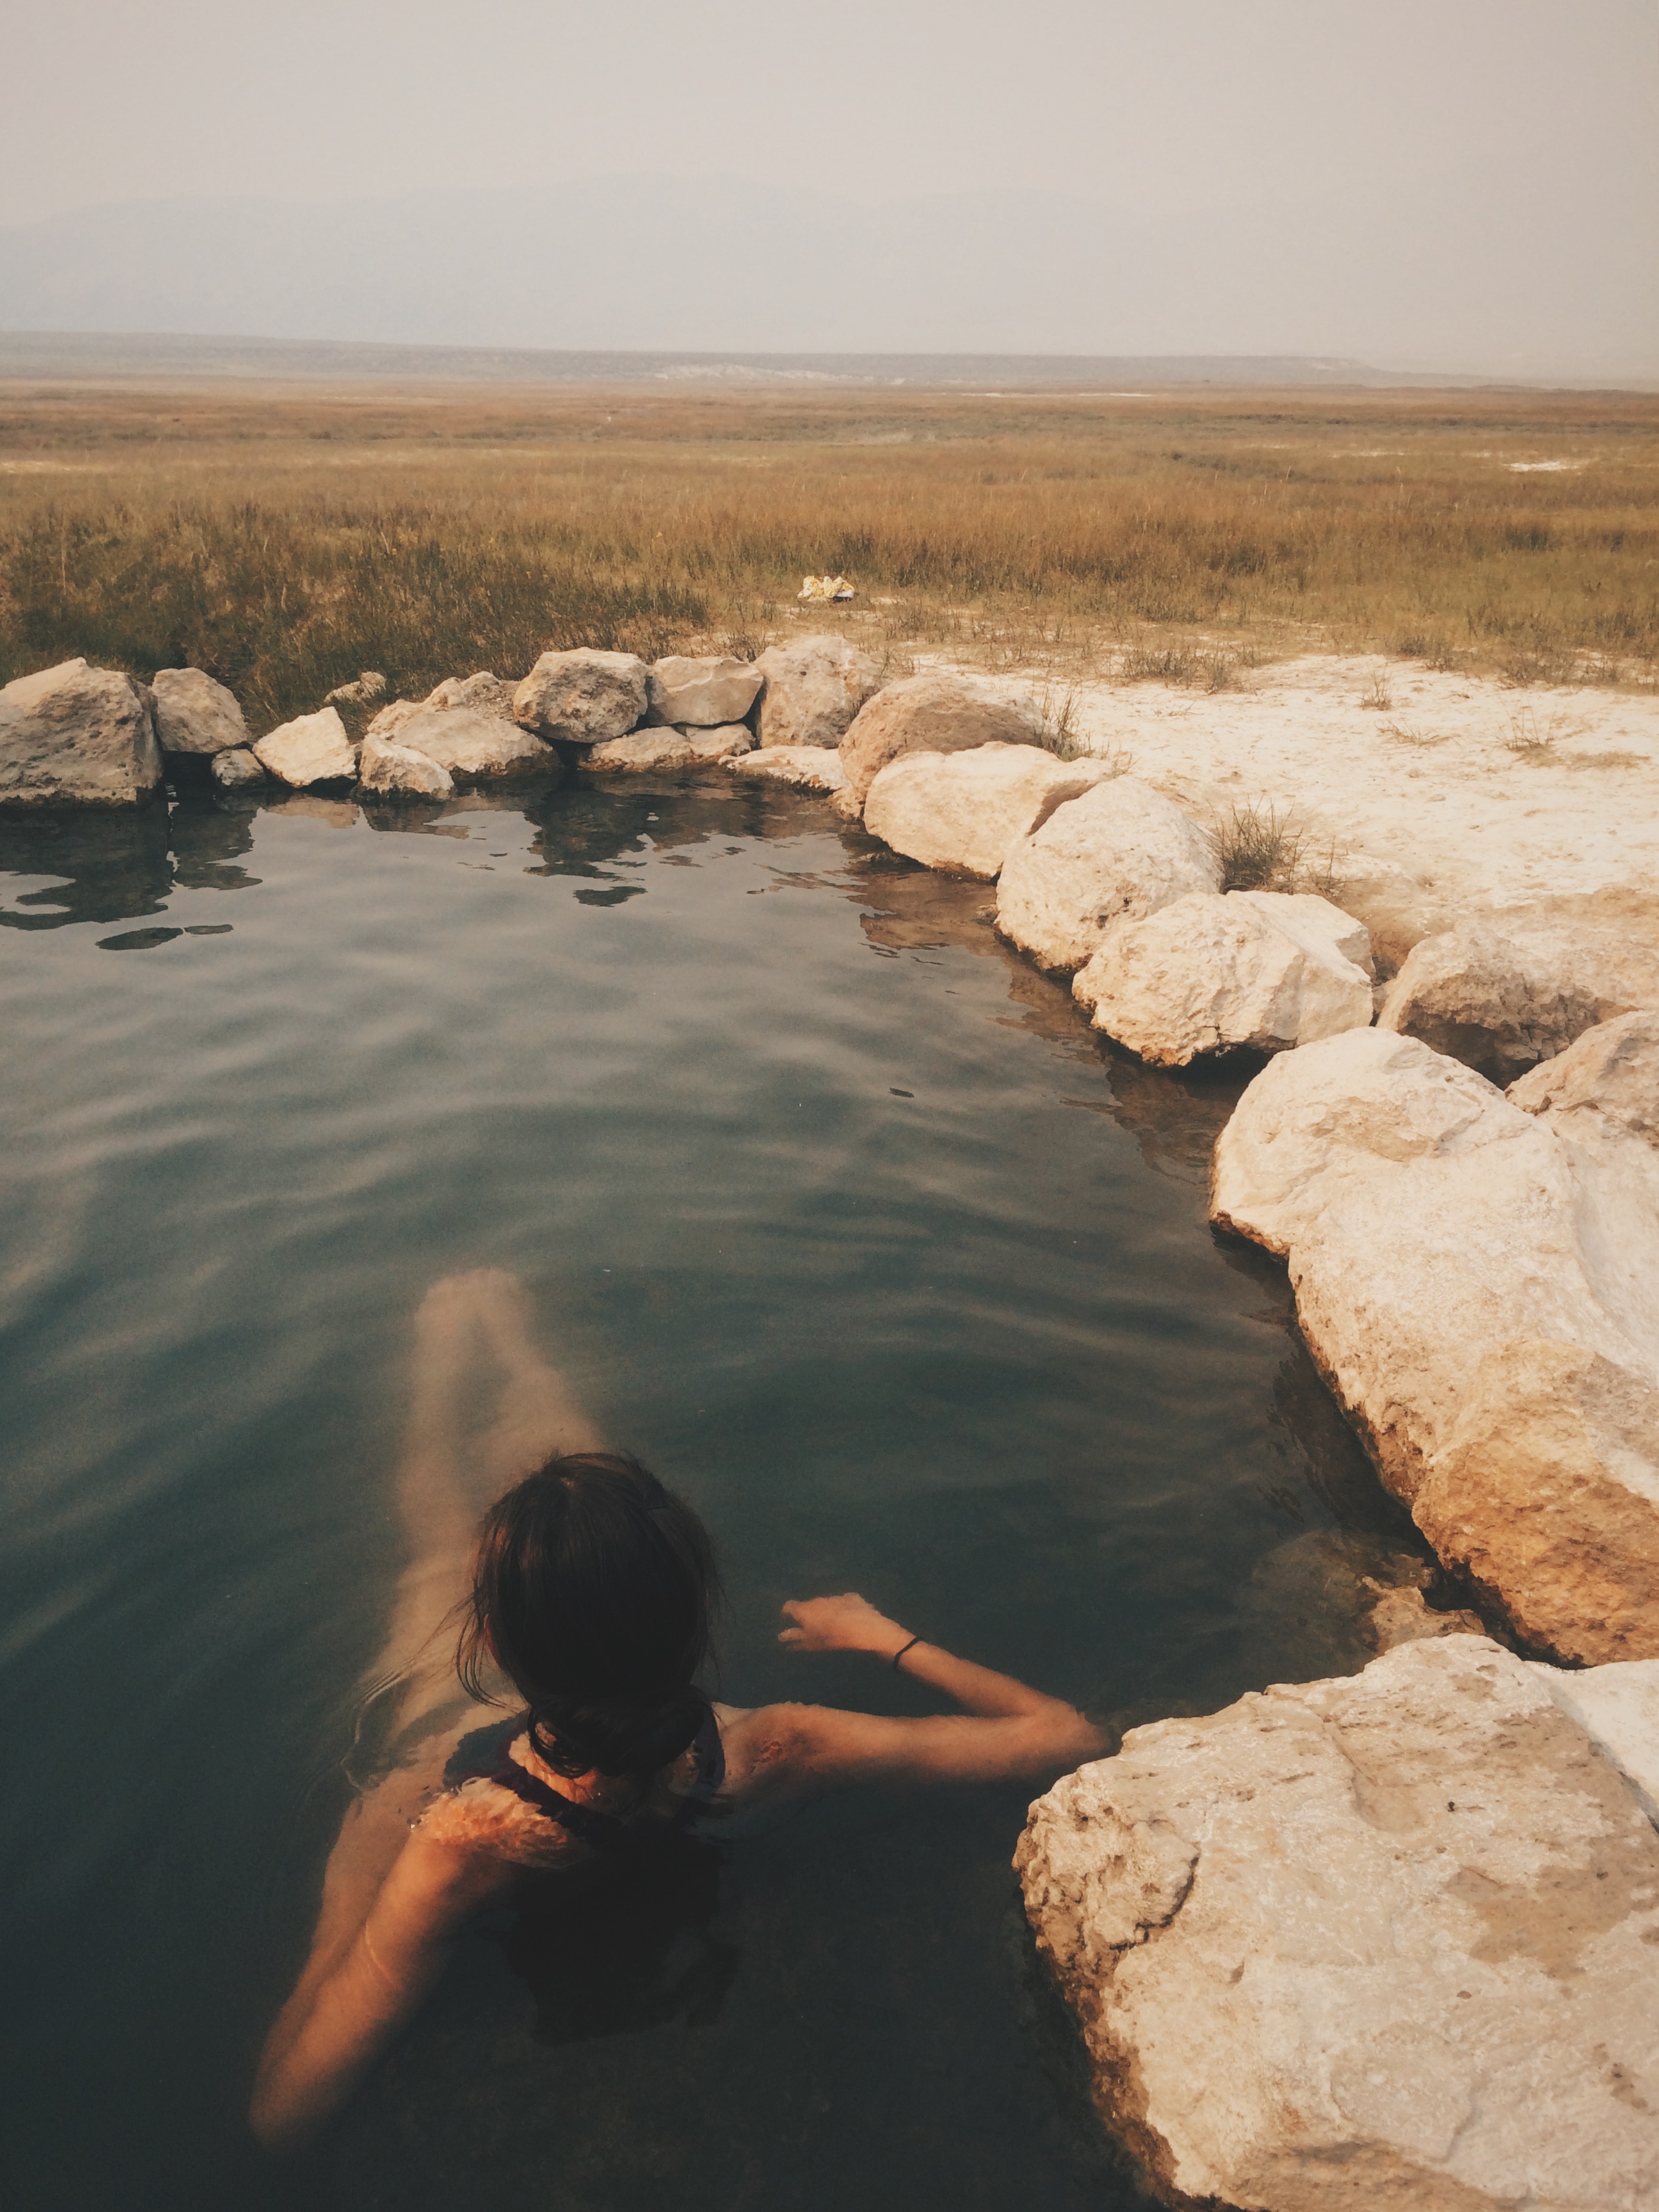  A well-deserved post-summit soak at Crowley Hot Springs in Owens Valley.&nbsp; 